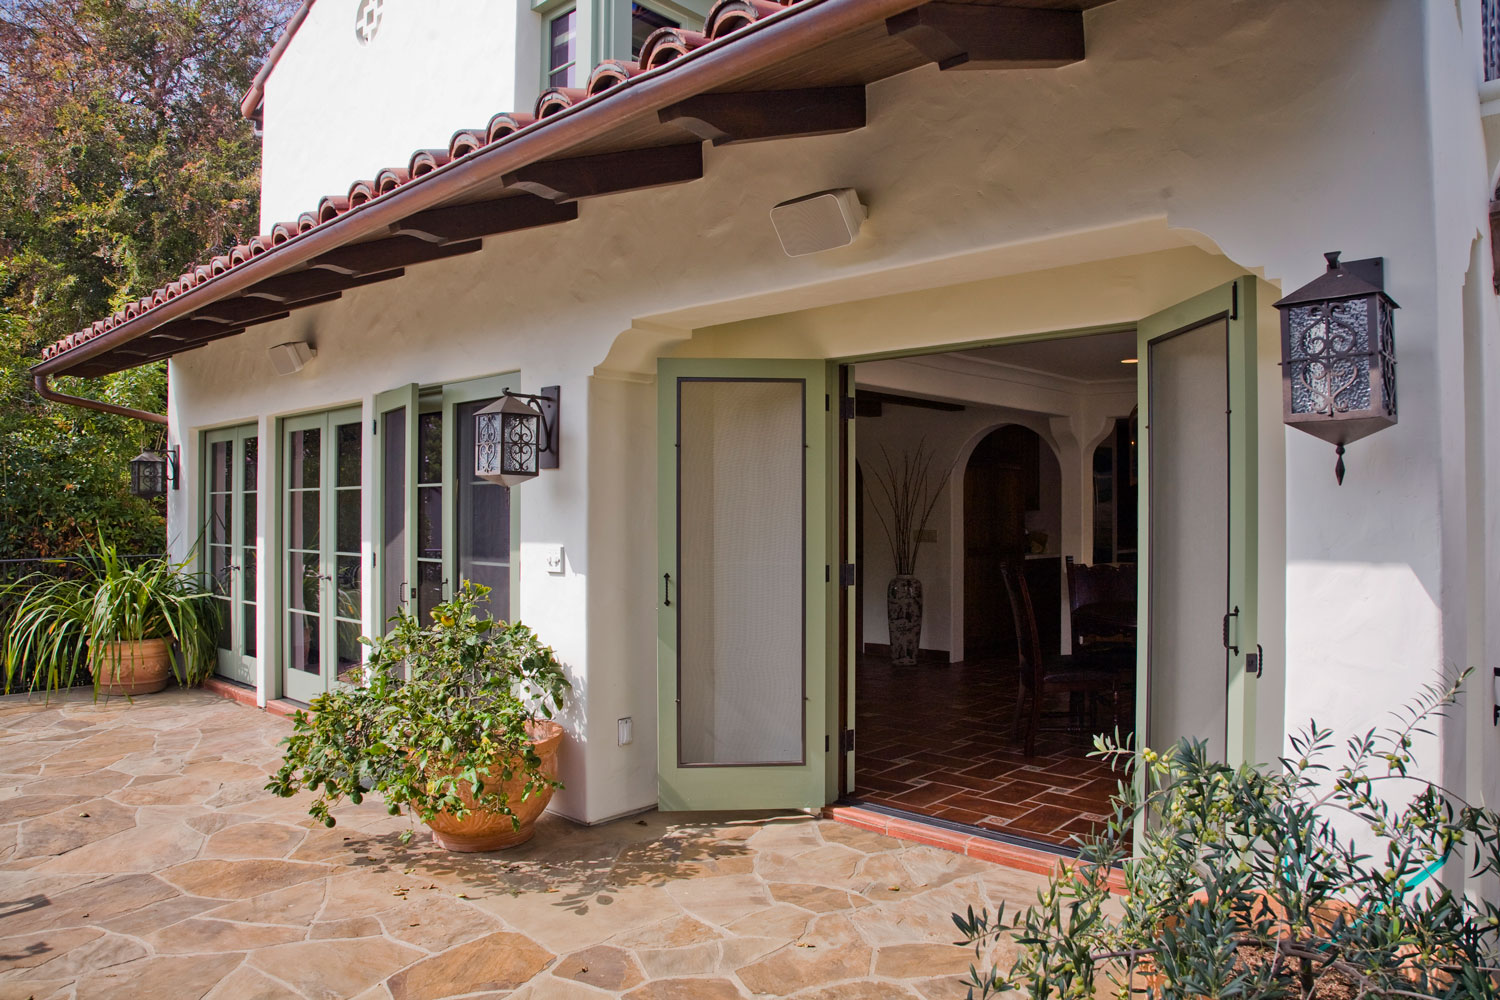 18-Spanish-Style-Rear-Patio-Flagstone-French-Doors-Gary-Drake-General-Contractor.jpg